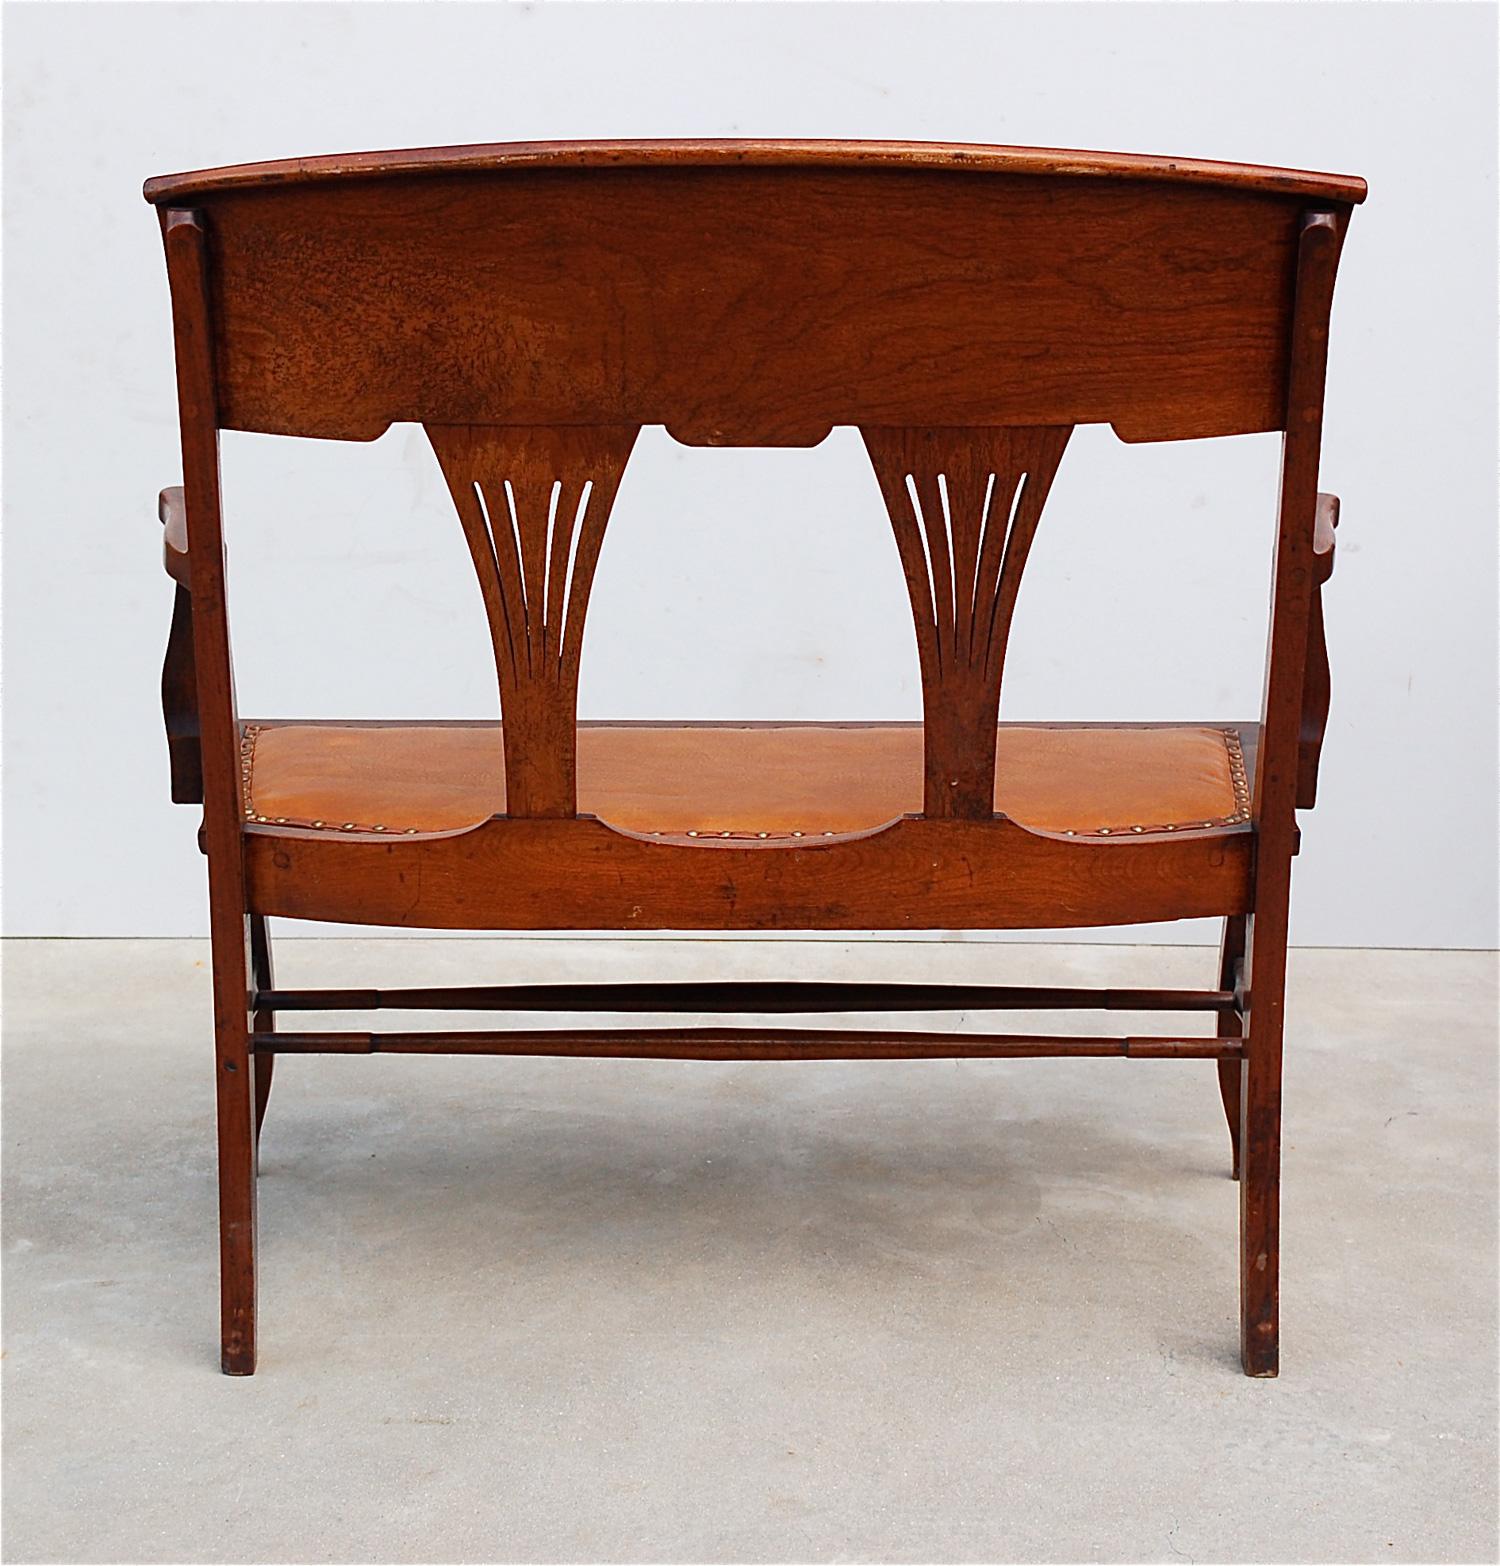 Charming occasional two-seat bench, settee, love seat, salon sofa or parlor settee in the Art Nouveau, Edwardian style. Lightly curved backrest with pierced fan shaped back splats. On cabriole legs with pegged joints, a scalloped apron and double